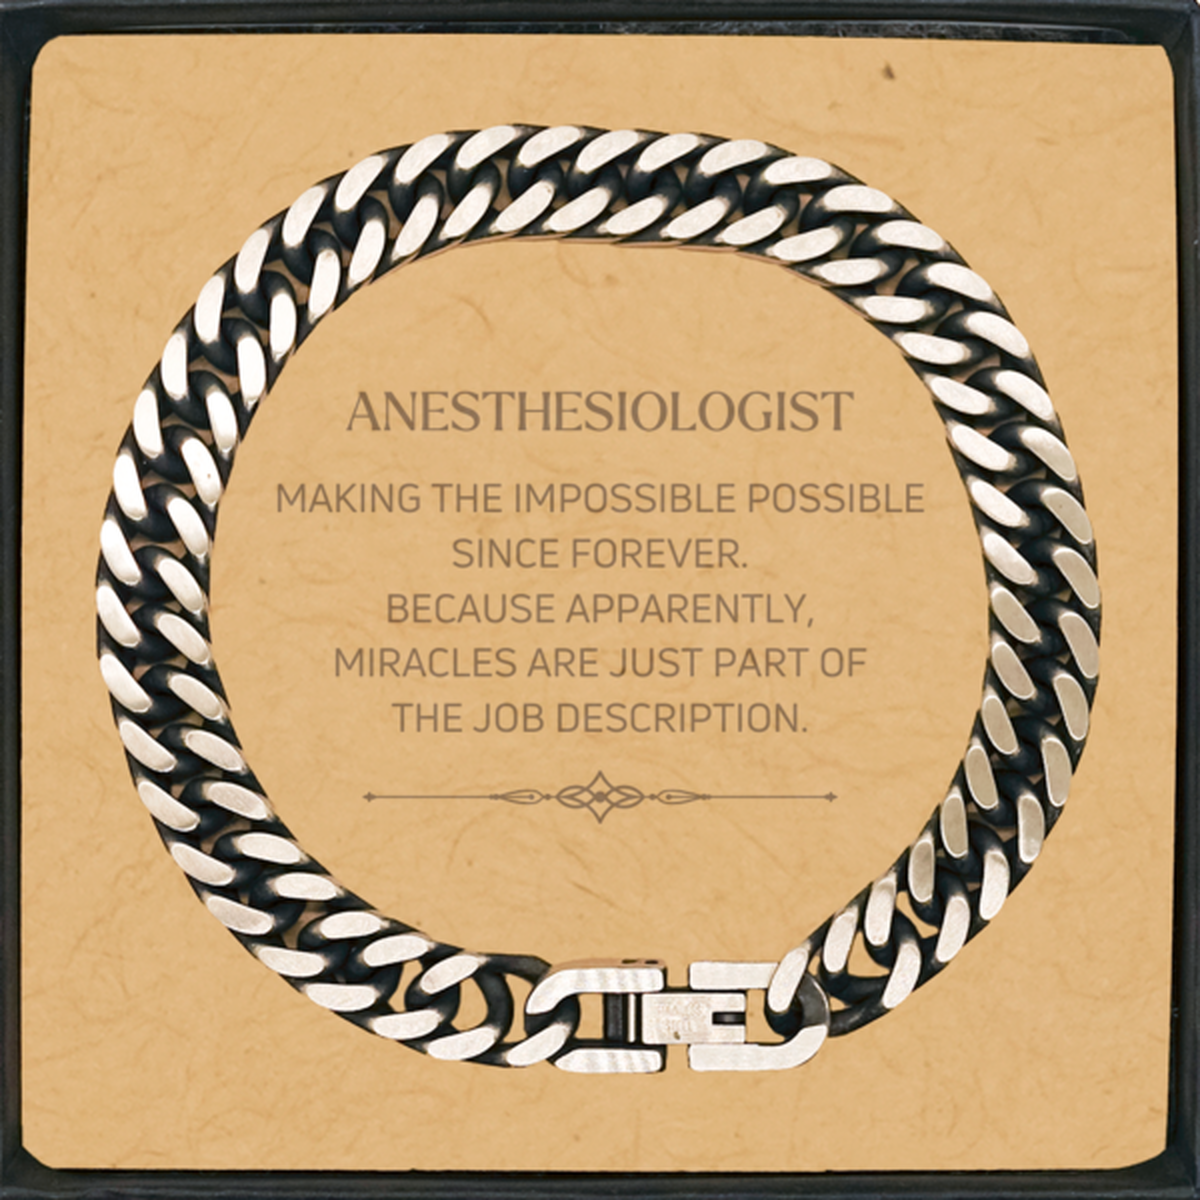 Funny Anesthesiologist Gifts, Miracles are just part of the job description, Inspirational Birthday Cuban Link Chain Bracelet For Anesthesiologist, Men, Women, Coworkers, Friends, Boss